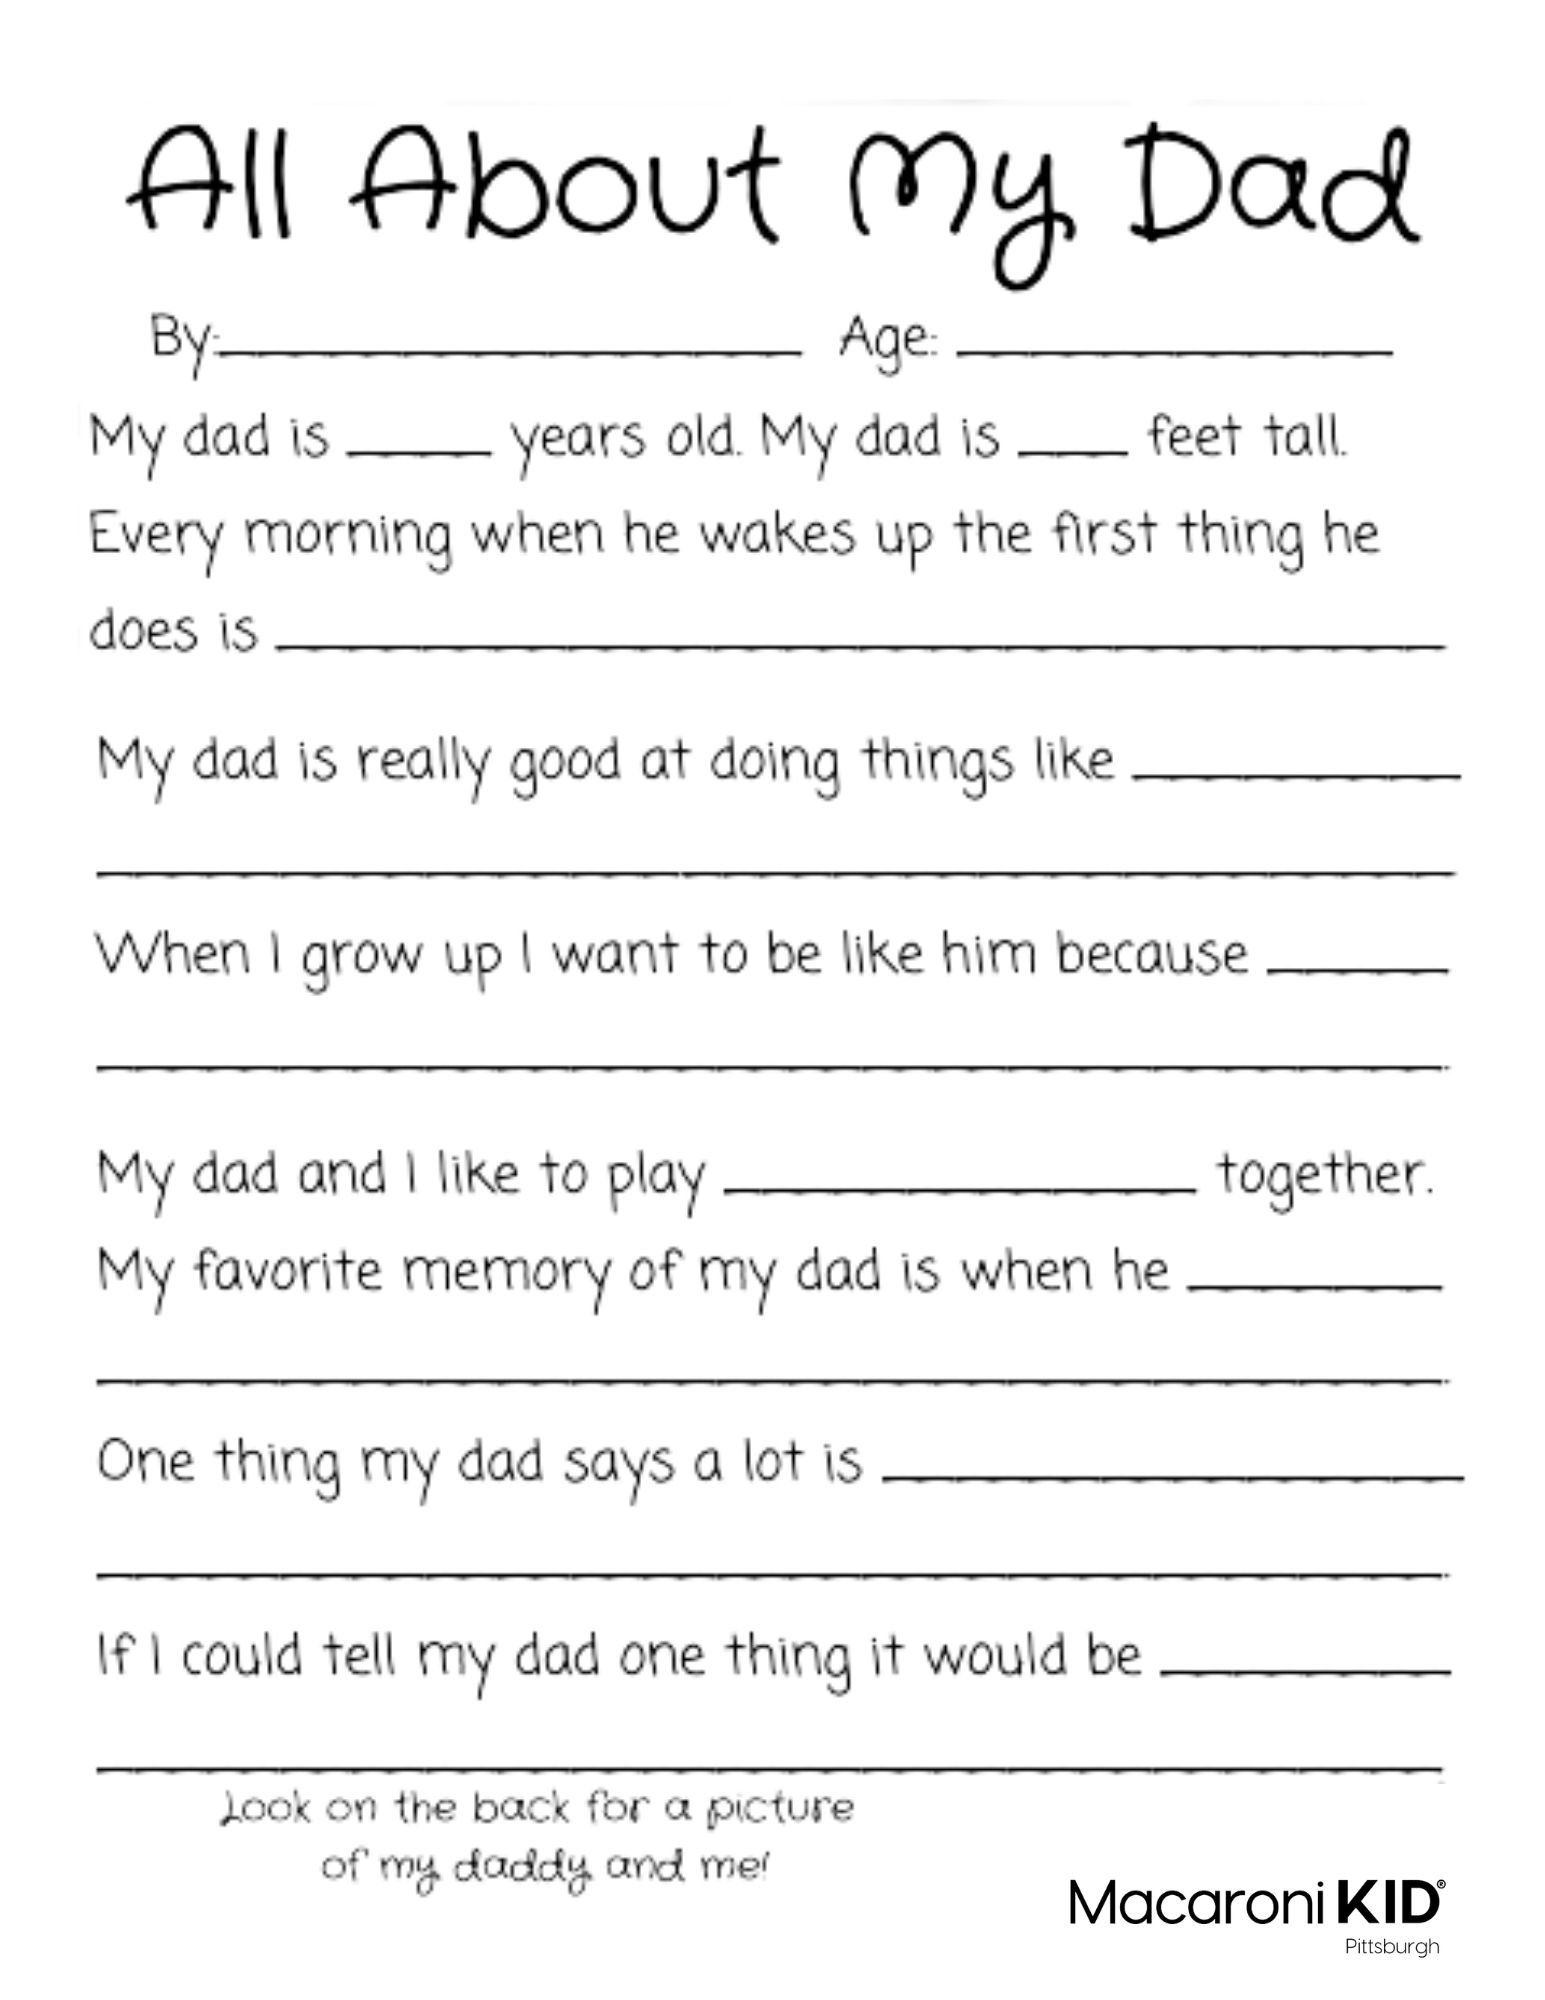 all-about-my-dad-a-father-s-day-questionnaire-and-free-printable